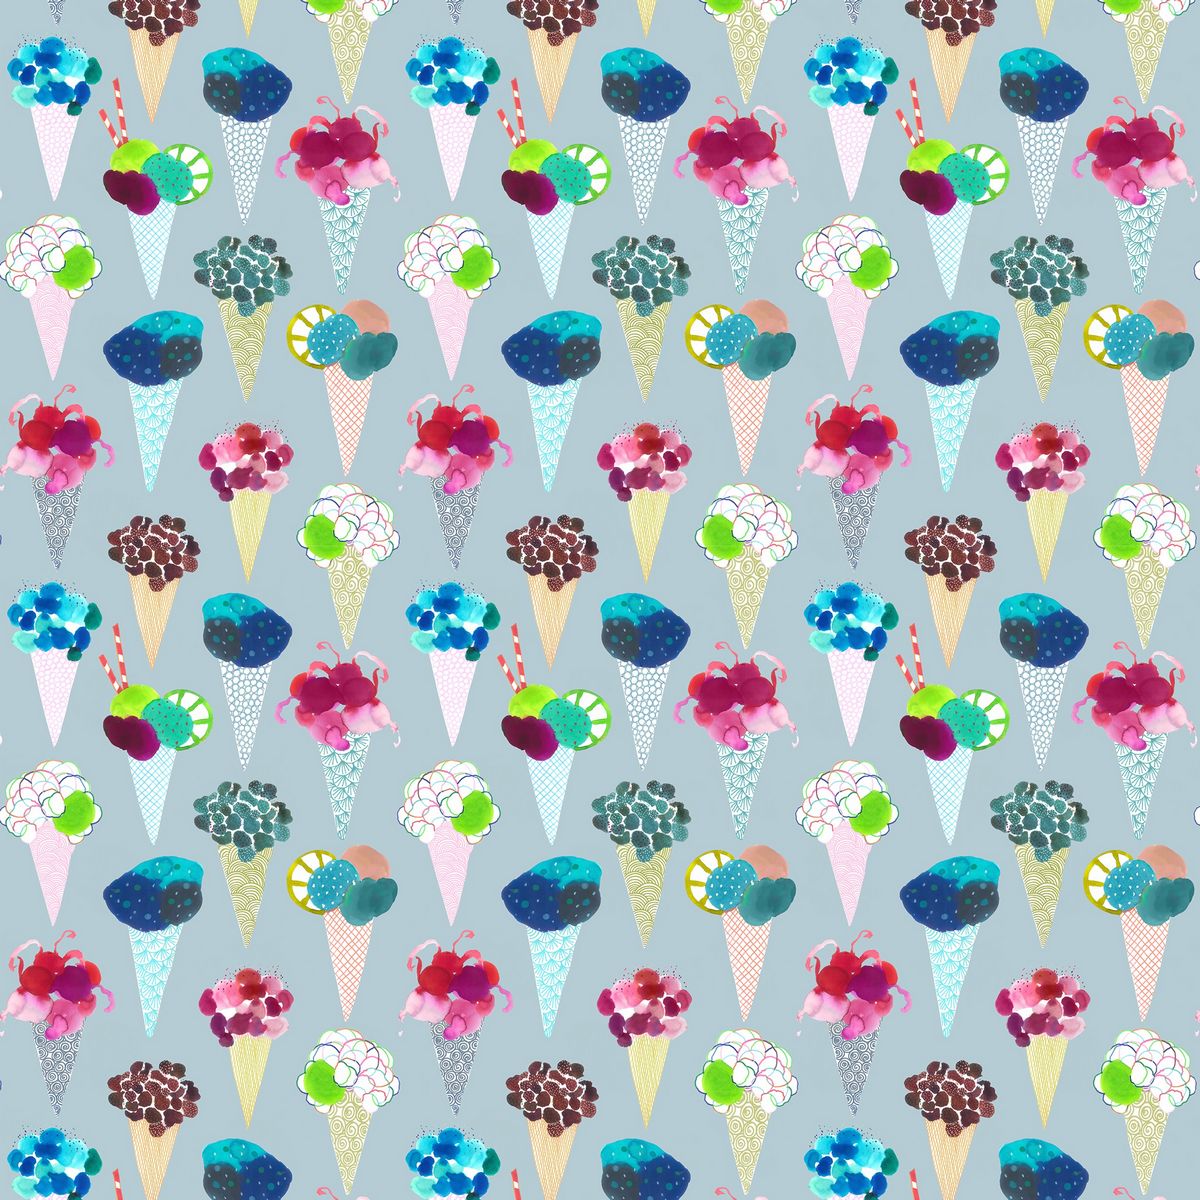 Icecream Carnival Fabric by Voyage Maison